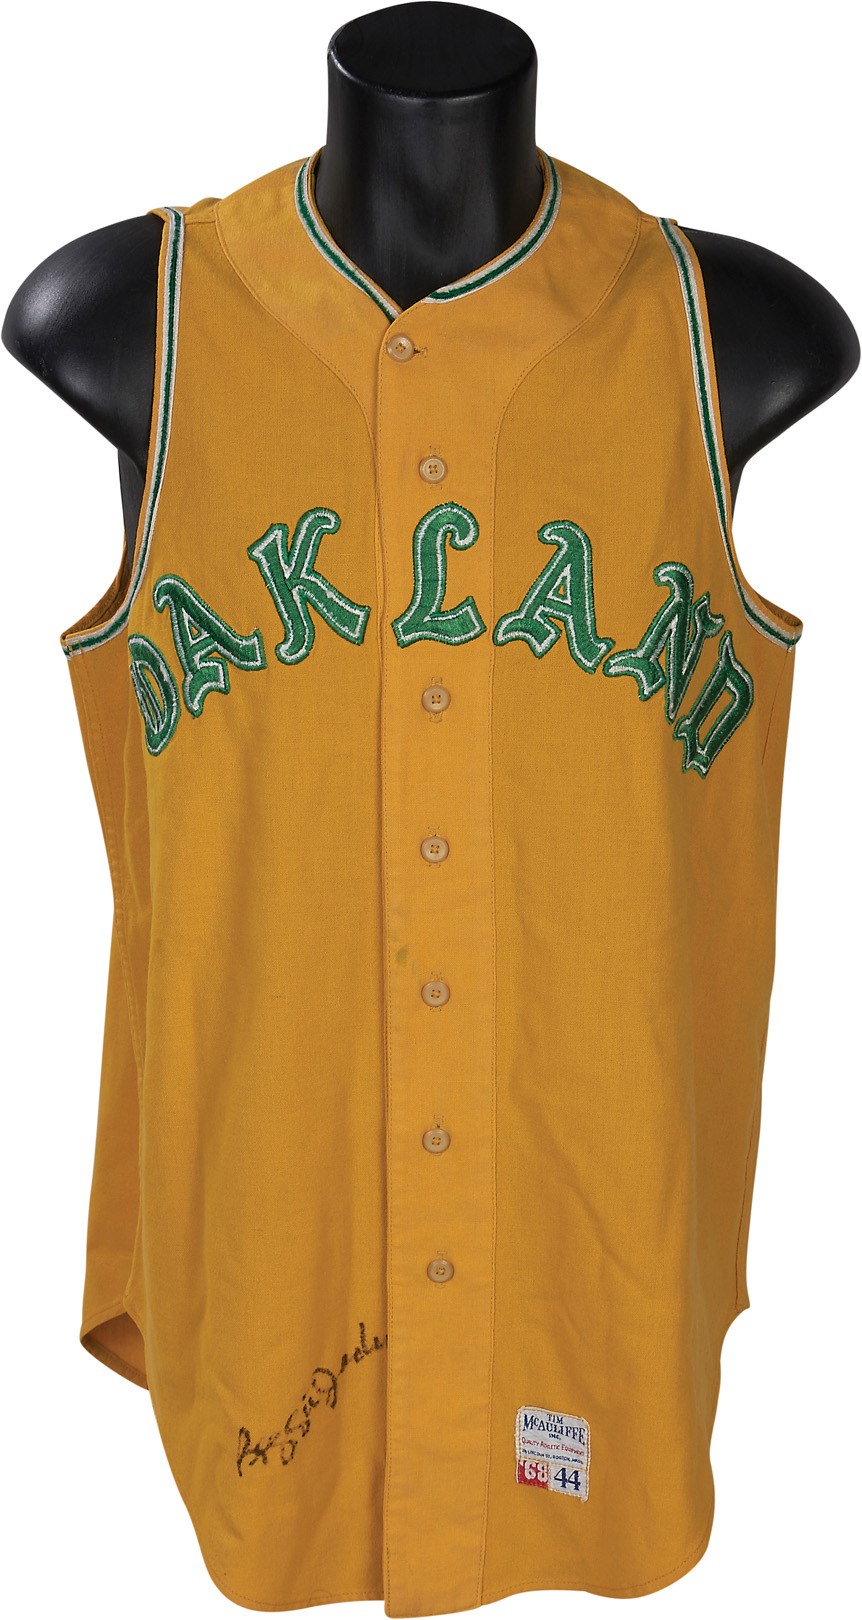 1968 Reggie Jackson Oakland A's Game Worn Signed Rookie Jersey (MEARS 10)